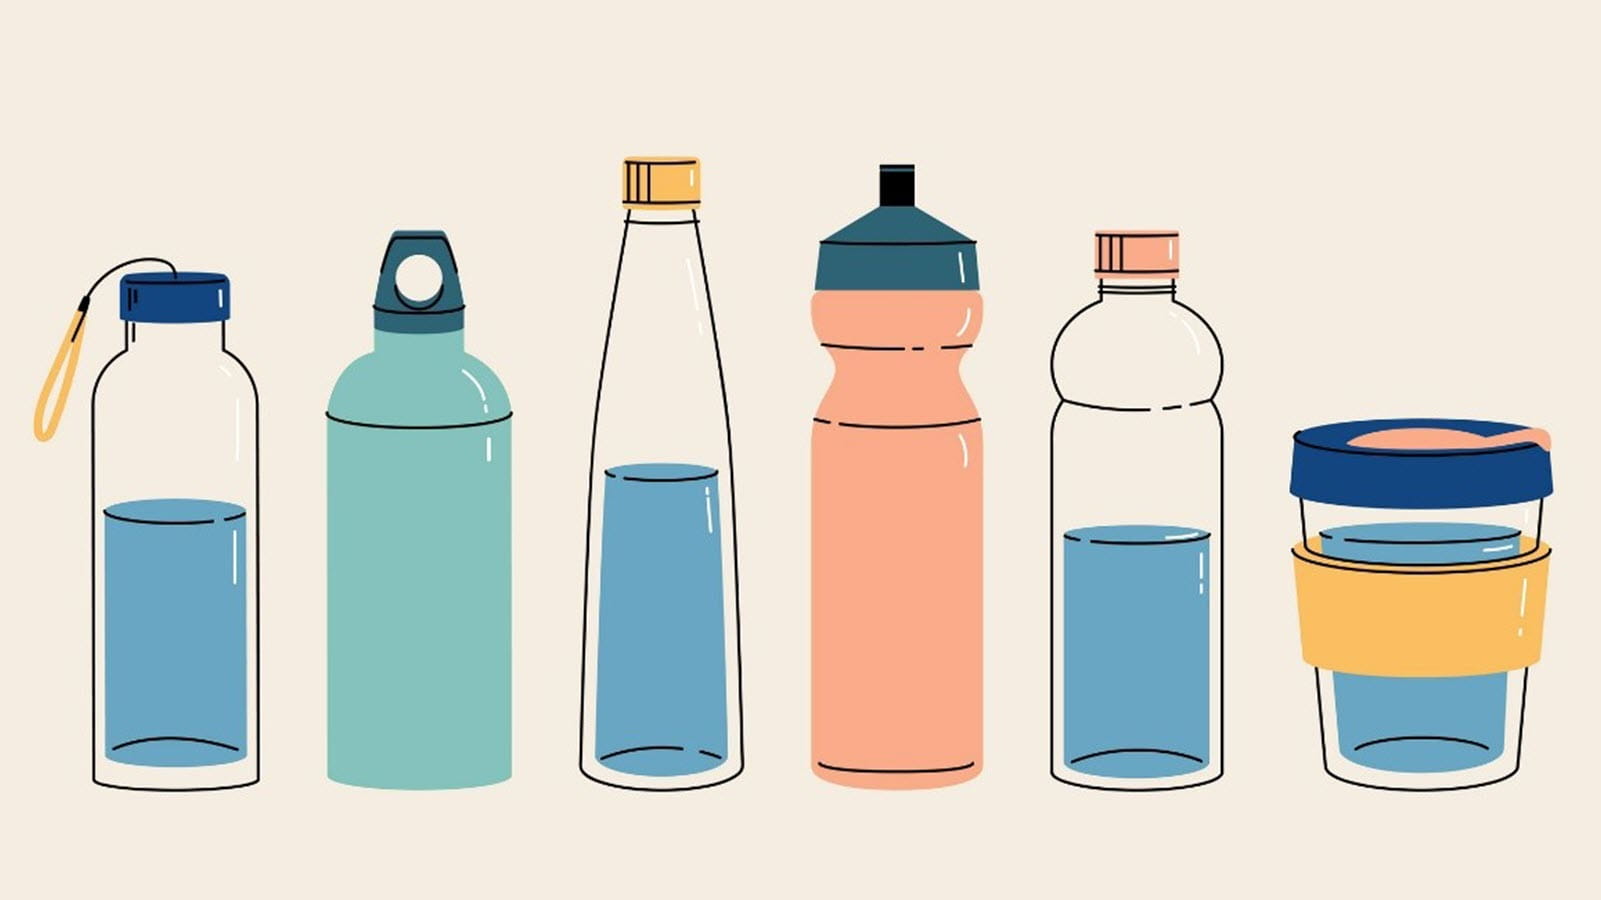 An illustration of pastel colored water bottles and cups